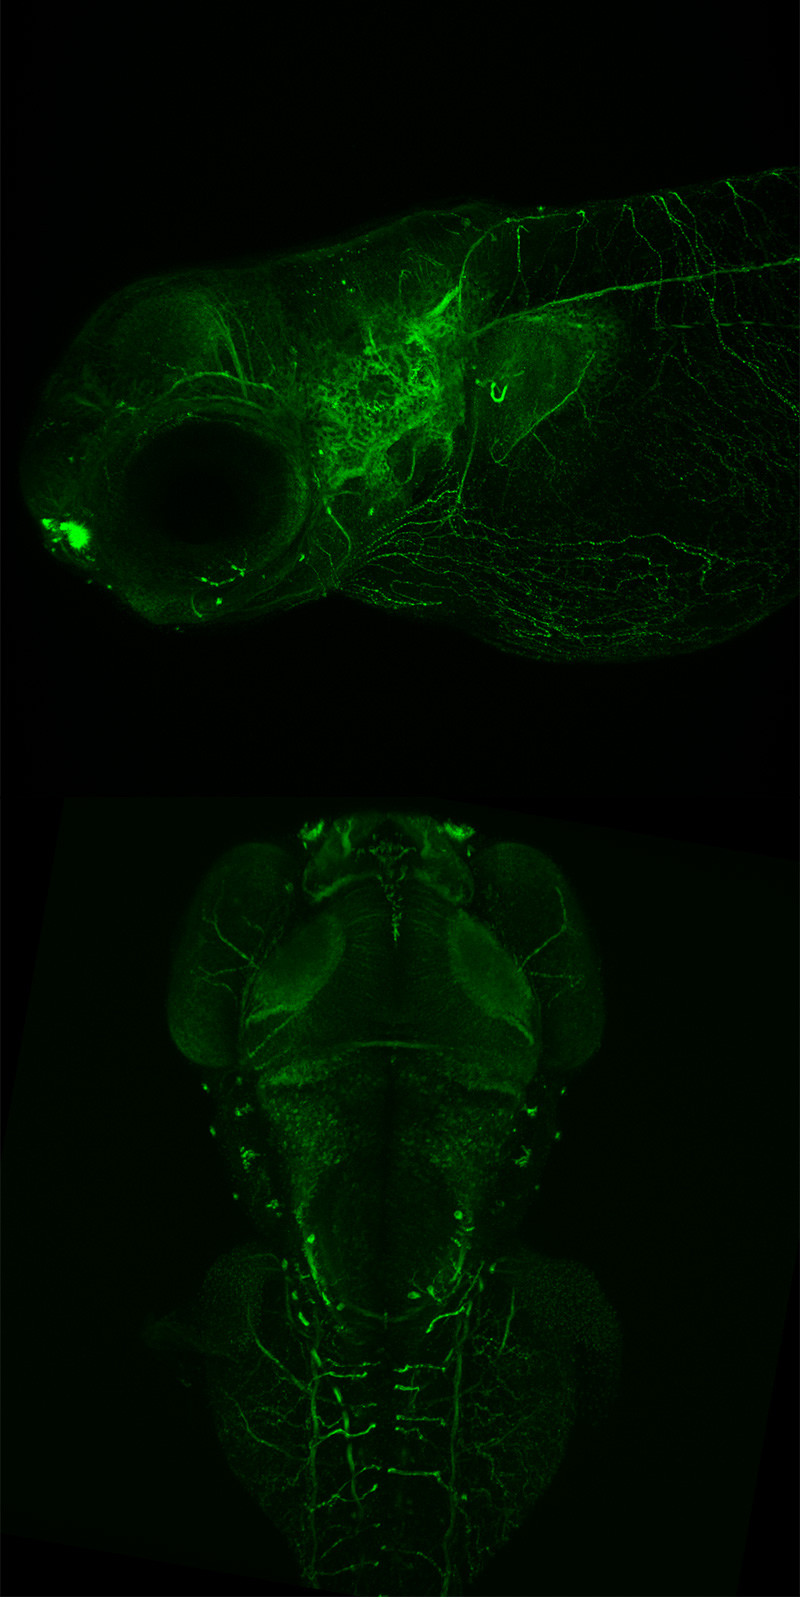 Dorsal and lateral maximum intensity projections of zebrafish embryos, 48 h post fertilization, showing developing neurons. (Courtesy of Aminah Giousoh and Dr. Robert Bryson-Richardson, School of Biological Sciences, Monash University, Victoria, Australia.)